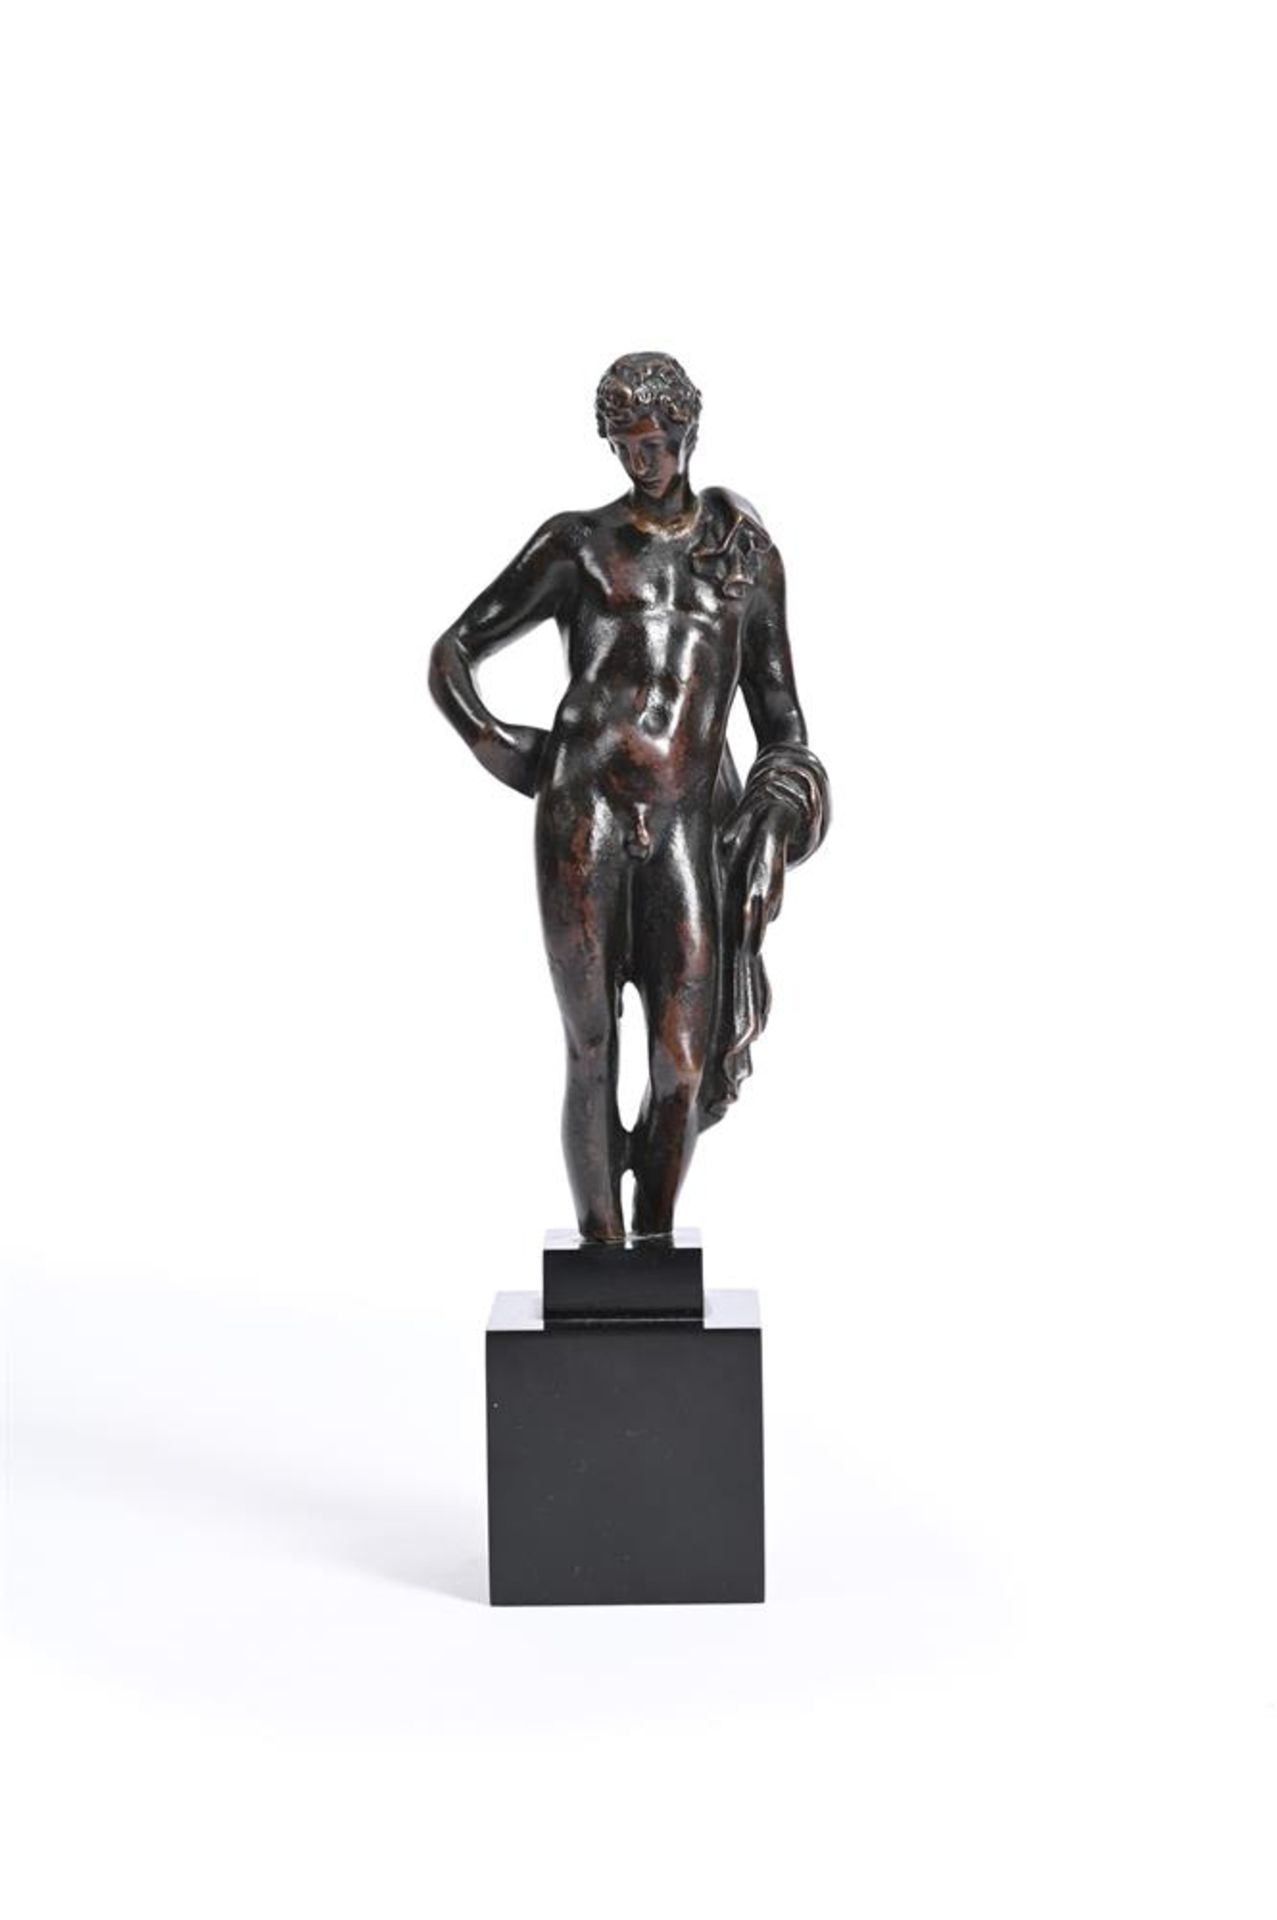 AFTER THE ANTIQUE, A BRONZE FIGURE OF THE BELVEDERE ANTINOUS, ITALIAN, 17TH CENTURY